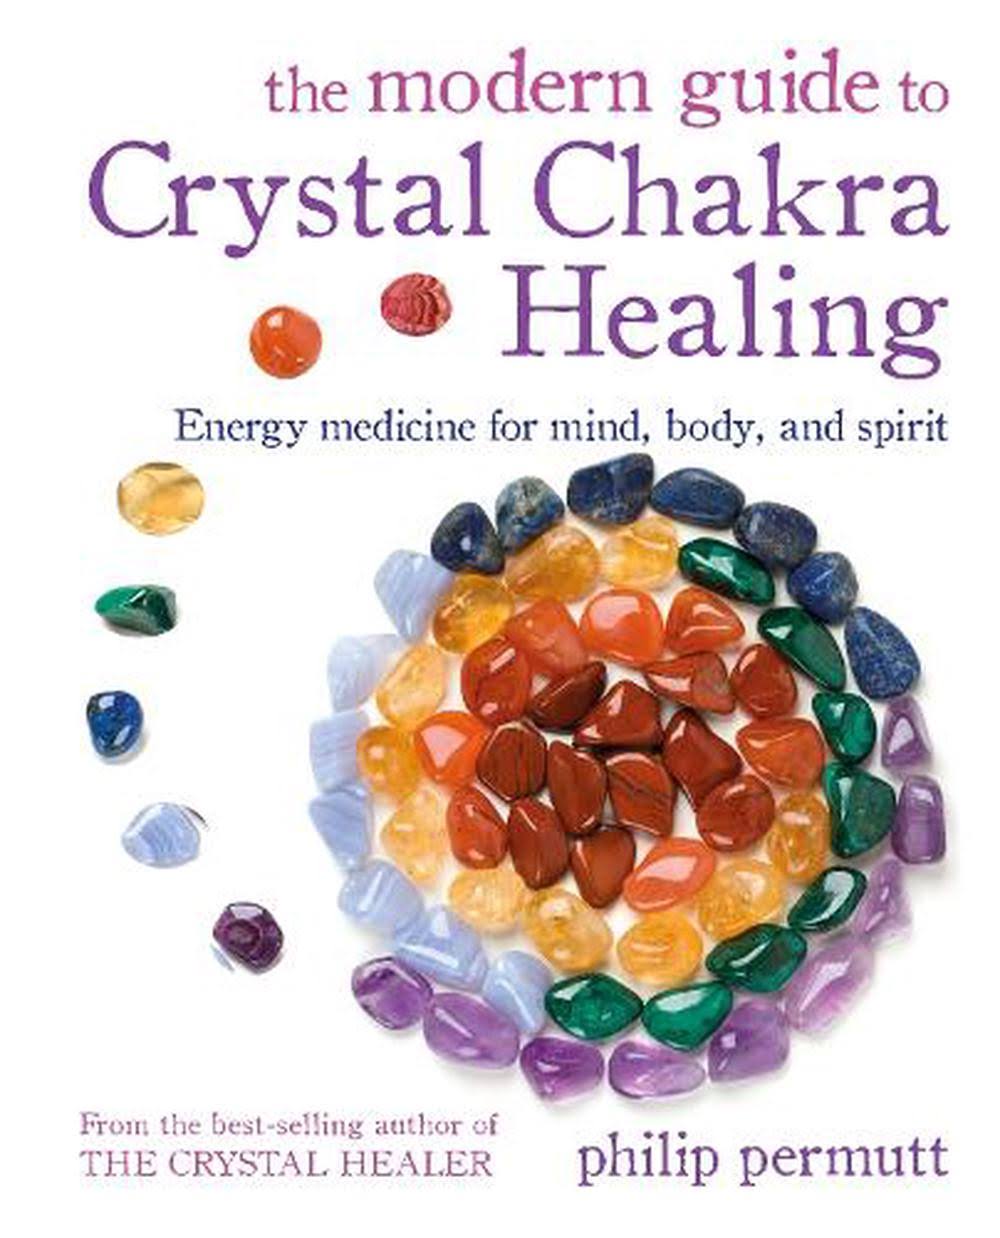 The Modern Guide to Crystal Chakra Healing: Energy Medicine for Mind, Body, and Spirit [Book]